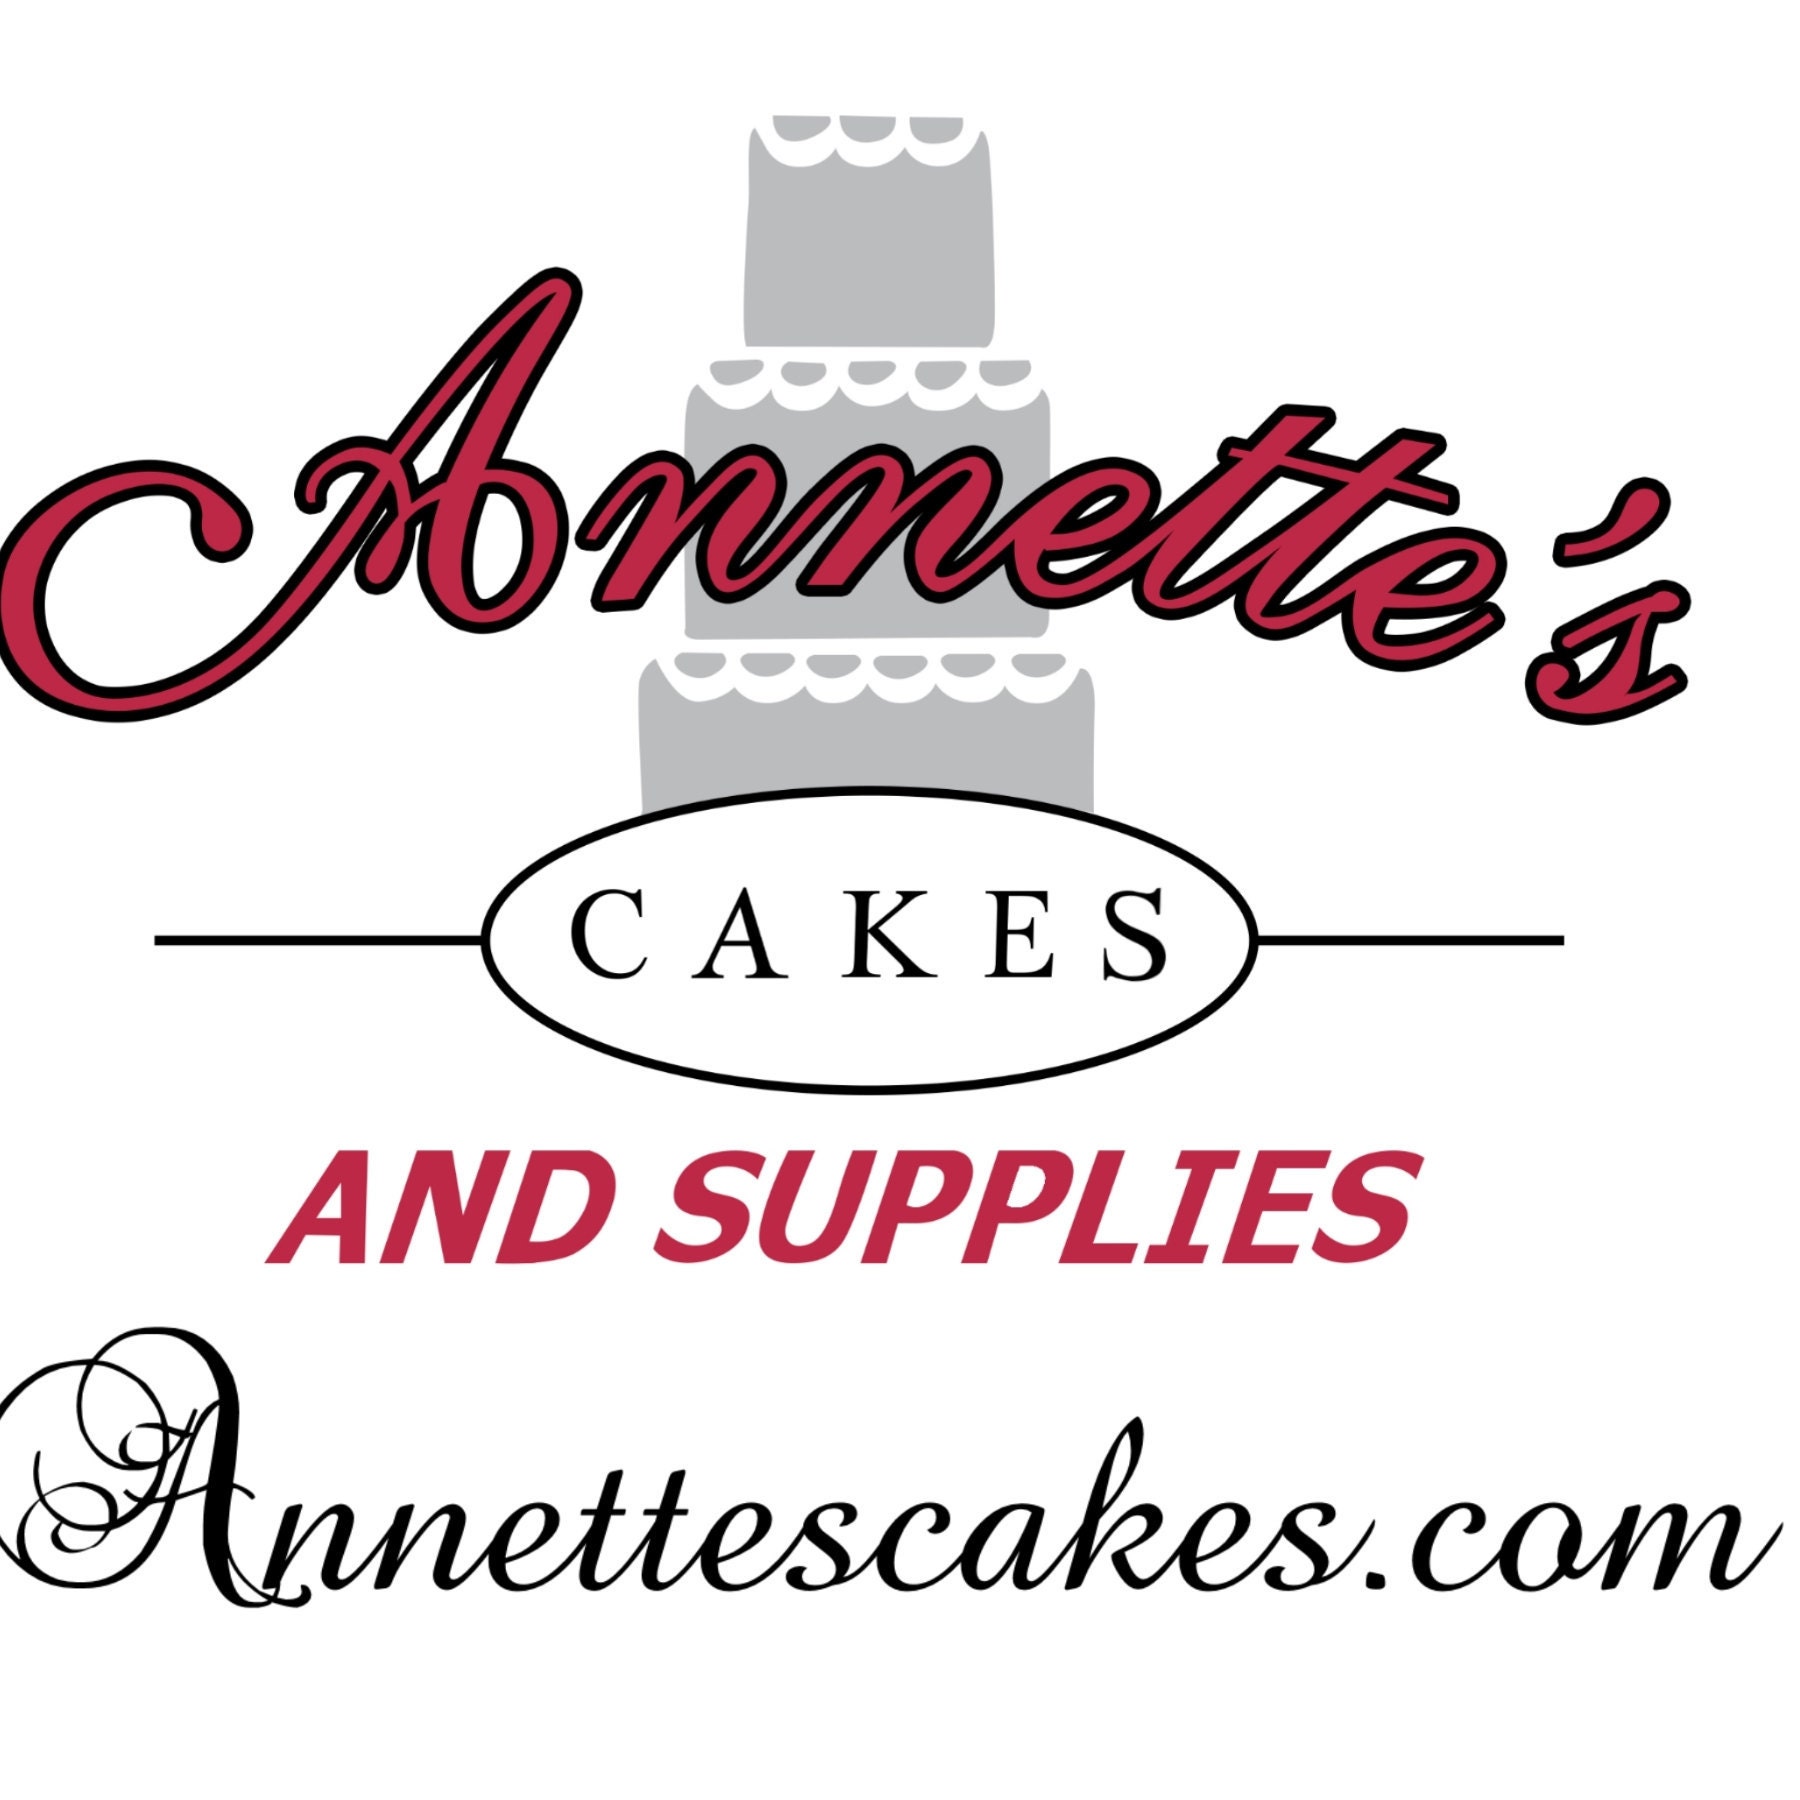 Miter Shears - Annettes Cake Supplies